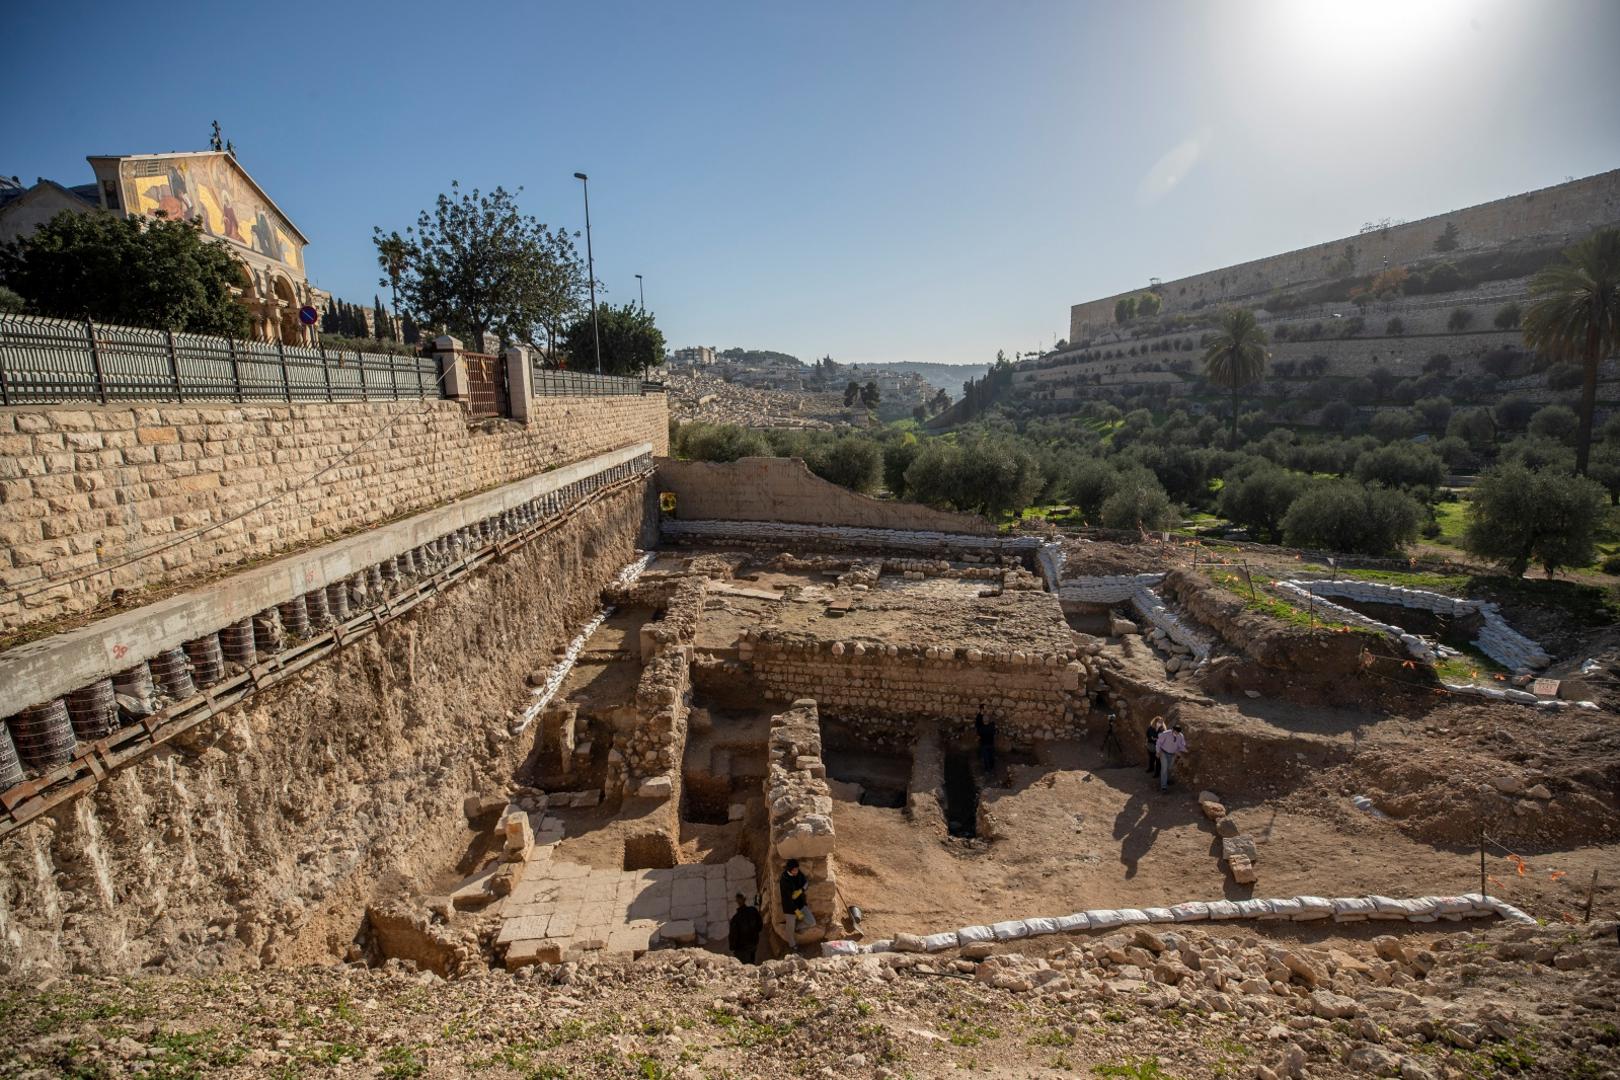 A view shows the remains of a previously unknown church that was founded at the end of the Byzantine period and a 2000-year-old ritual bath discovered at the site dates from the time of Jesus's presence in Jerusalem A view shows the remains of a previously unknown church that was founded at the end of the Byzantine period and a 2000-year-old ritual bath discovered at the site dates from the time of Jesus's presence in Jerusalem at the Garden of Gethsemane church in Jerusalem, December 21, 2020. Atef Safadi/Pool via REUTERS POOL